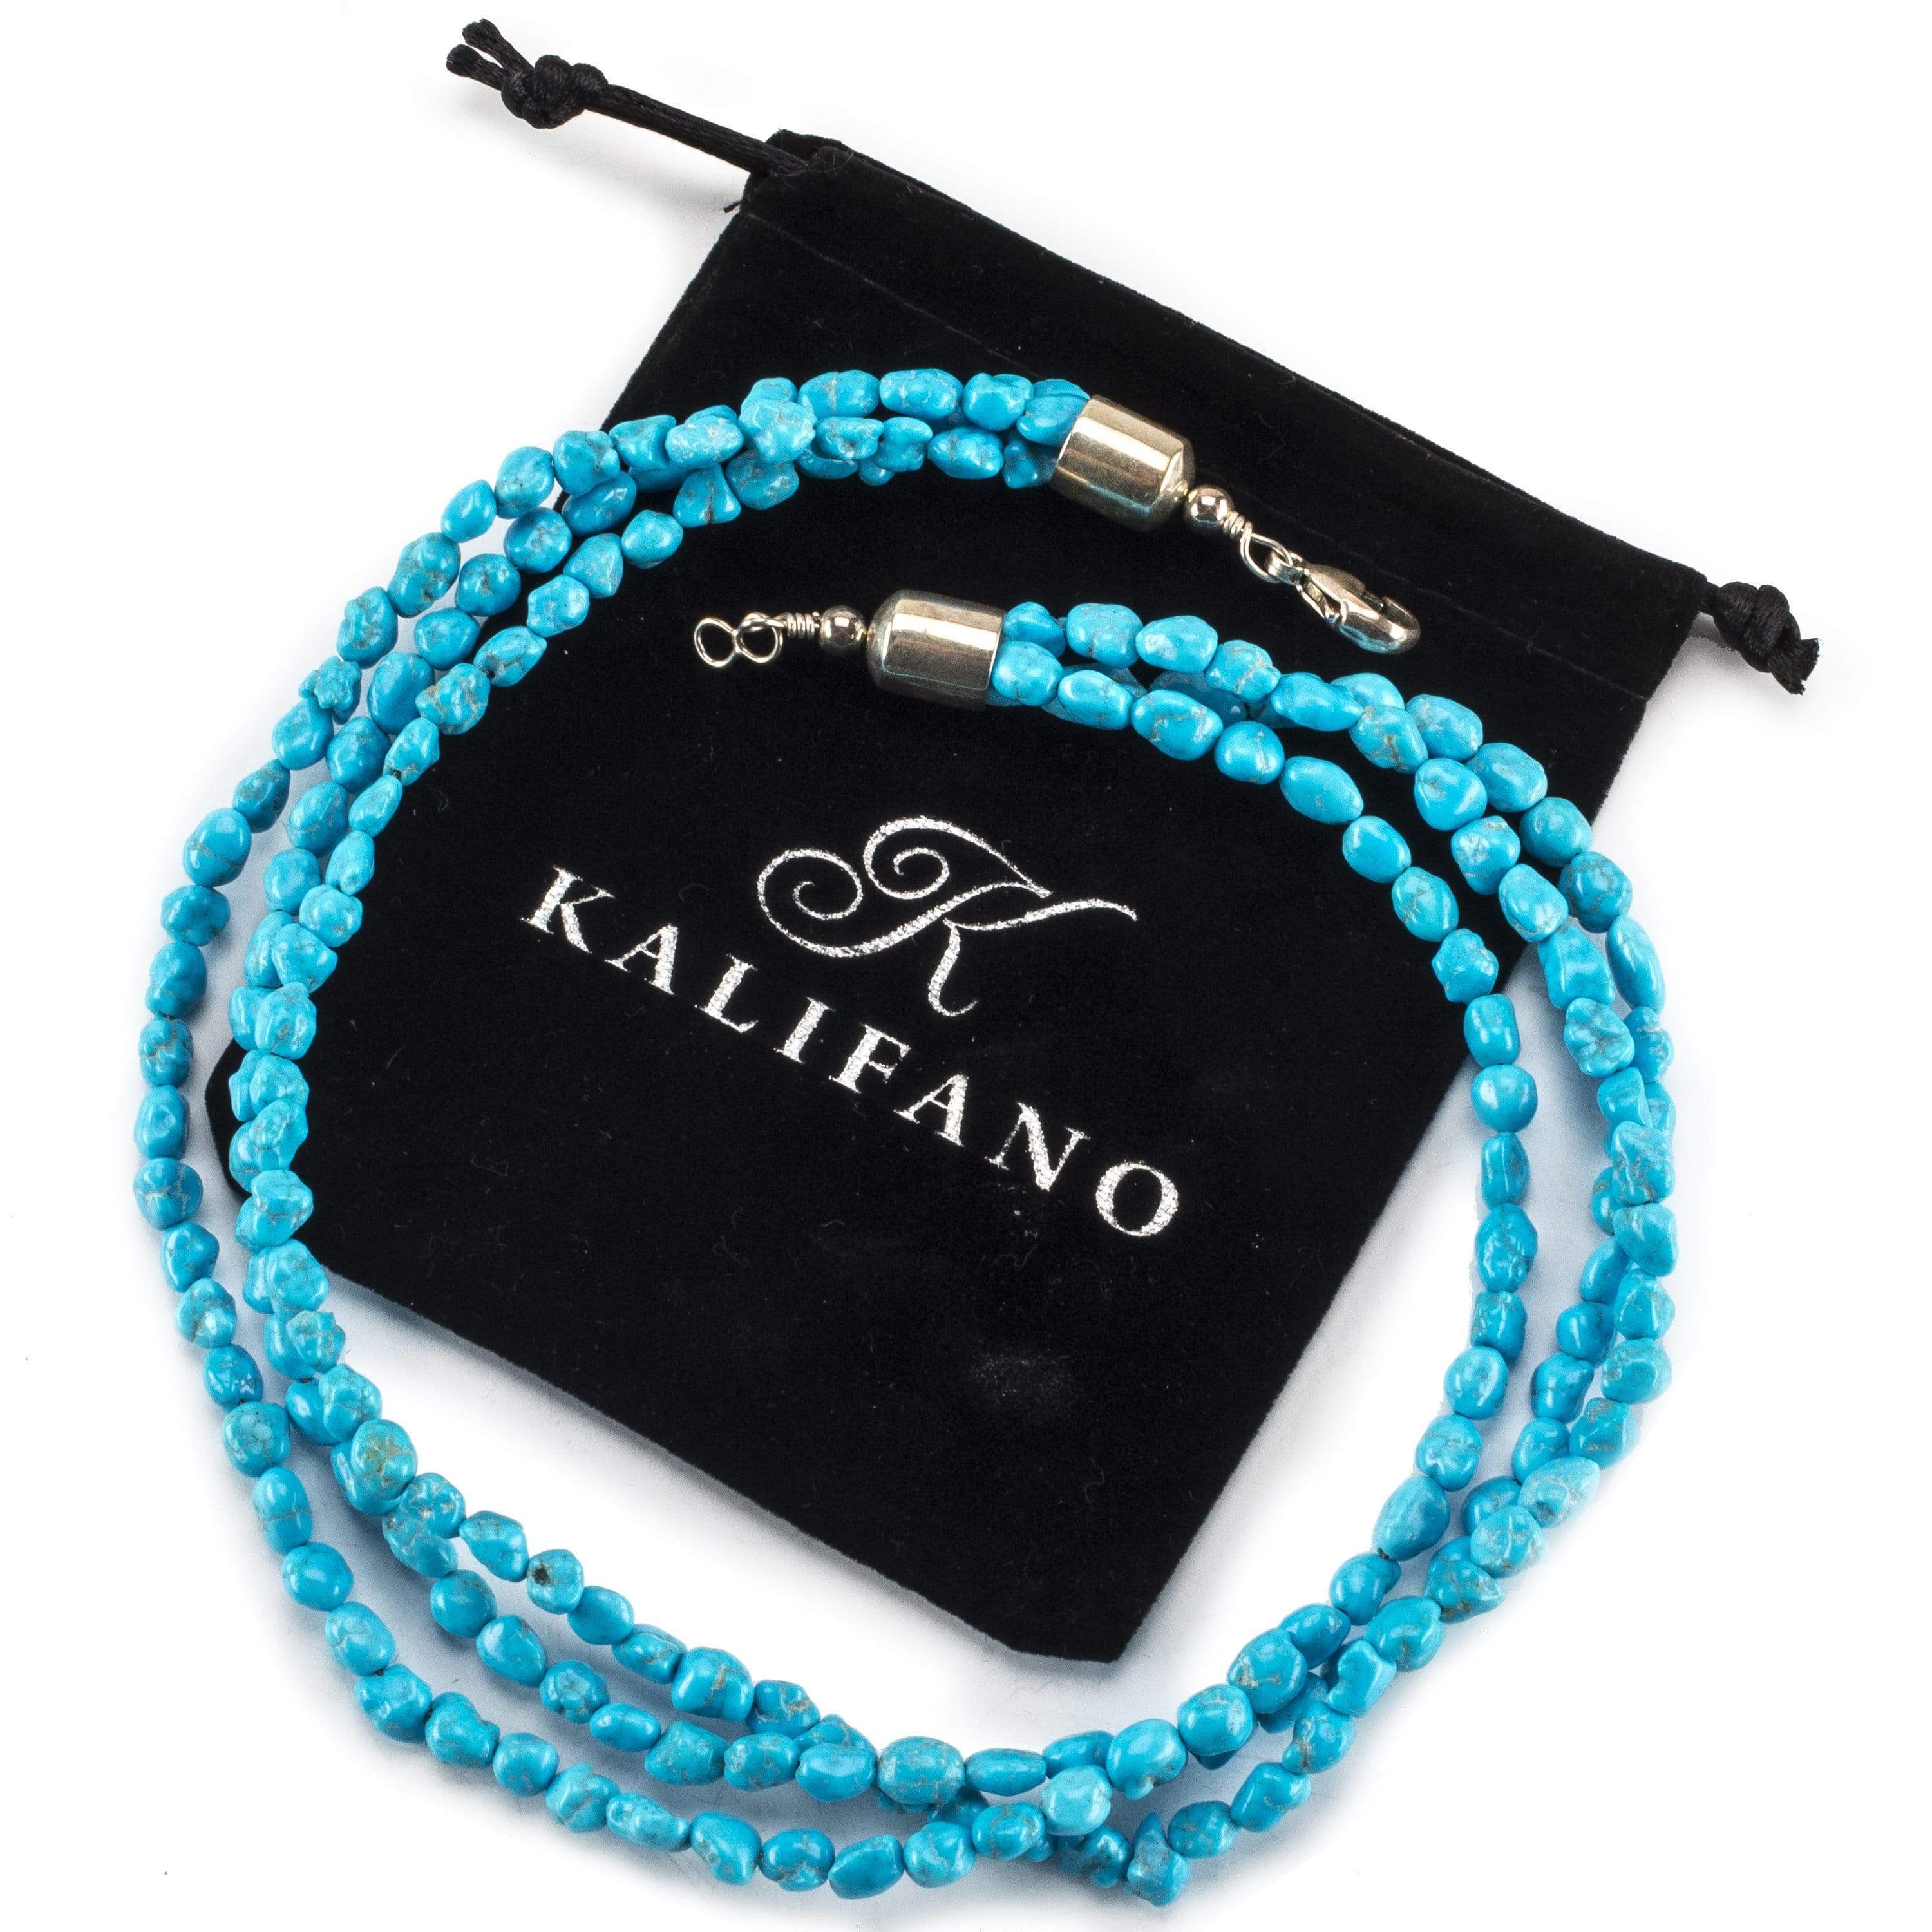 Kalifano Native American Jewelry 18" Three Strand Genuine Turquoise Nugget USA Native American Made 925 Sterling Silver Necklace NAN600.002